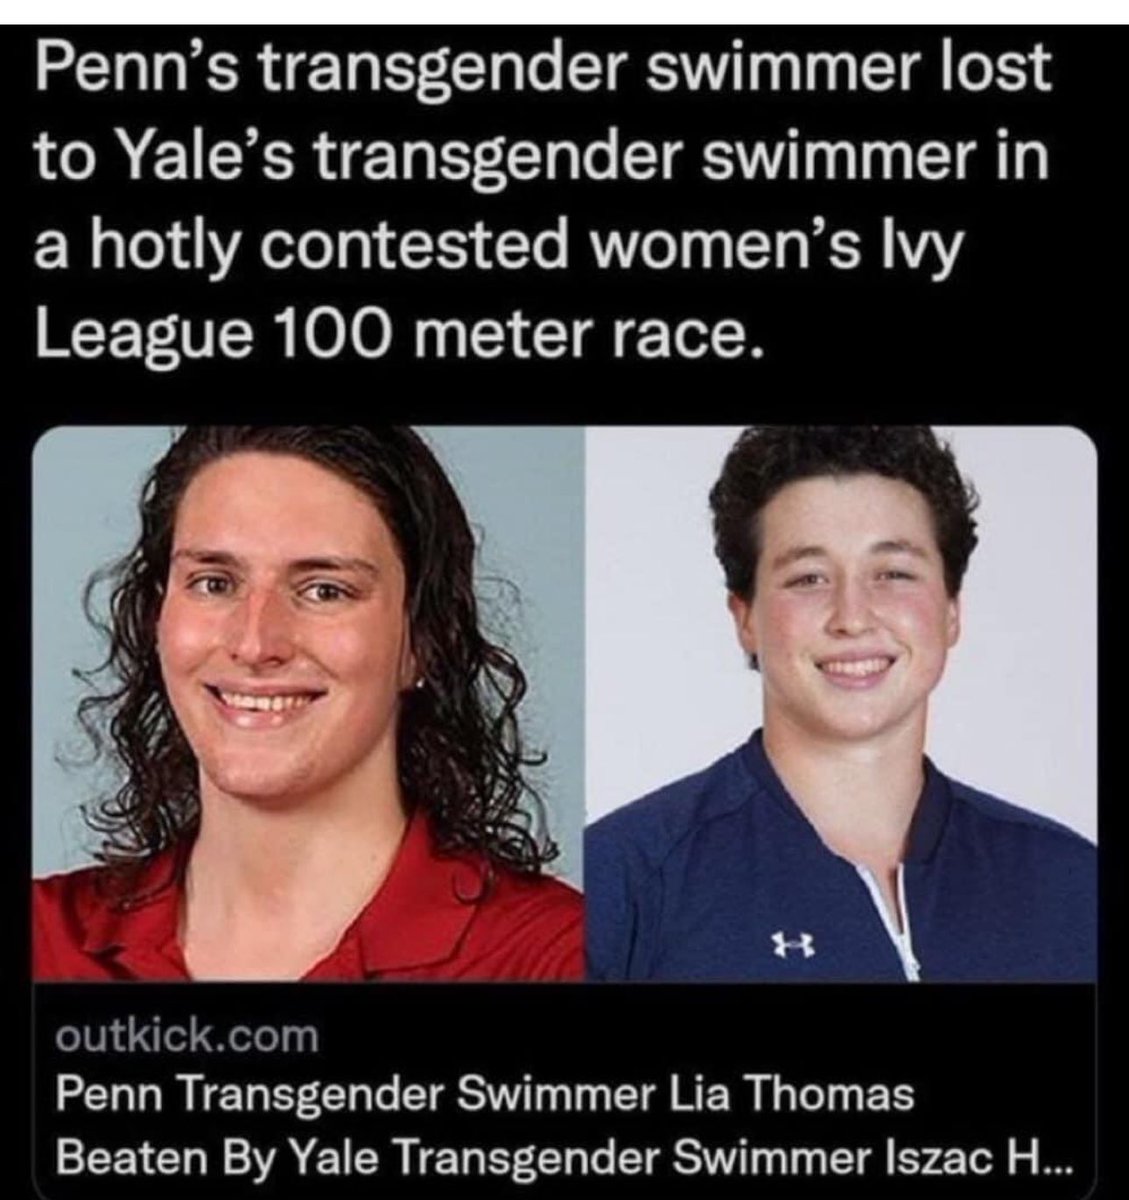 Couldn’t make this stuff up. The scriptures are pretty clear that if they won’t listen to reason He will send them over to their own carnal nature that inevitably destroys itself. Romans 1. If they want this so badly make a “trans” category. Leave men out of women’s sports!